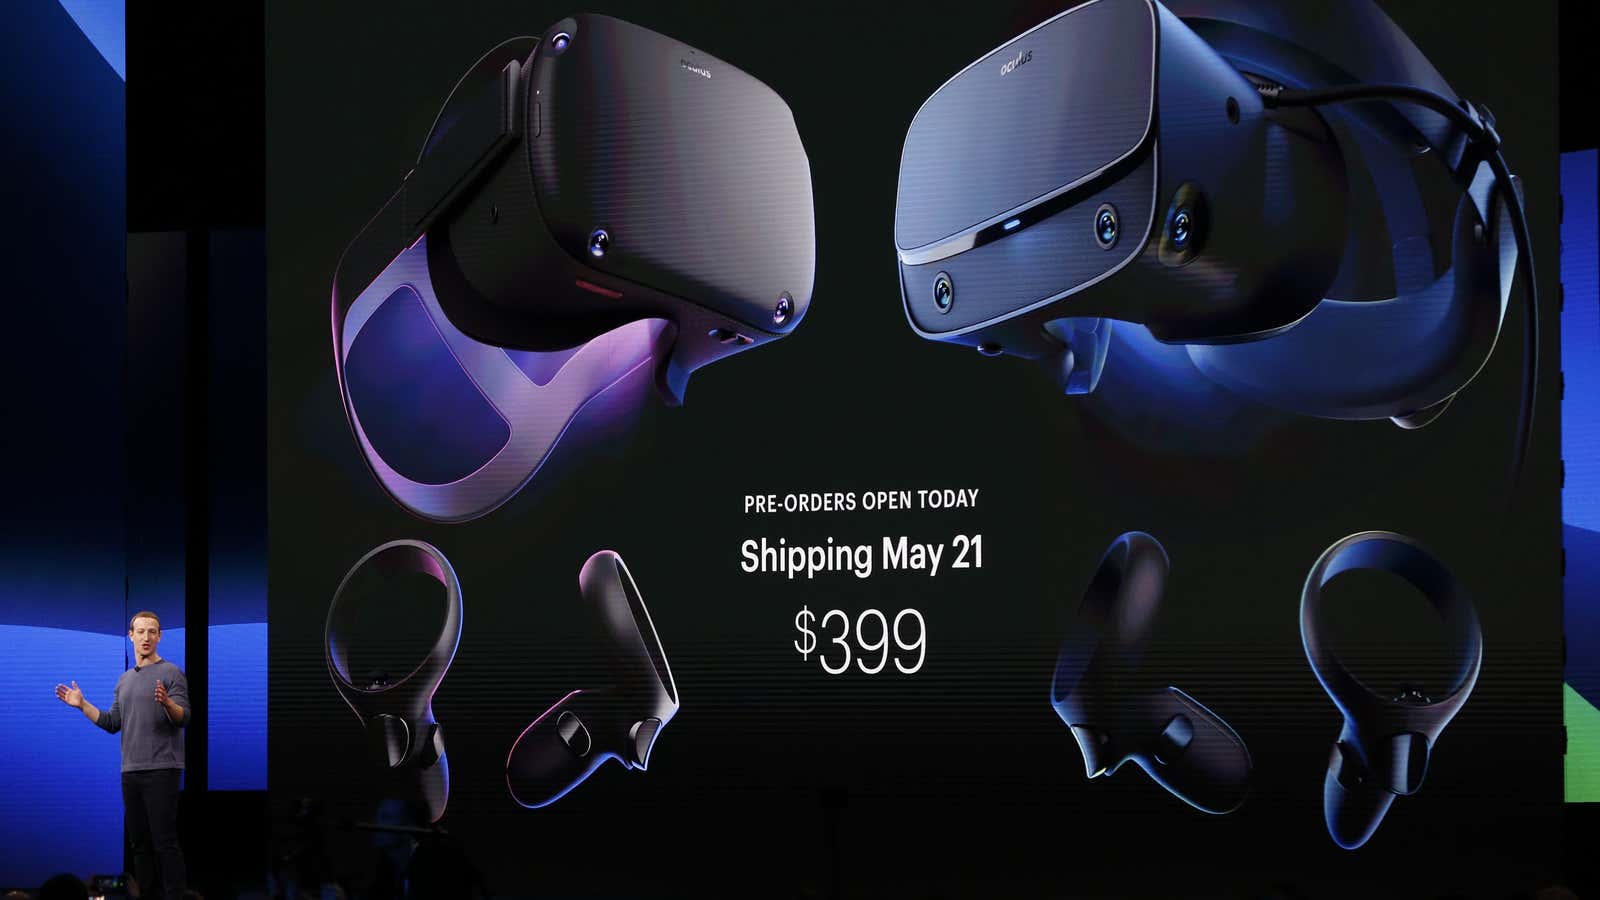 Facebook runs ads. It also sells VR headsets.